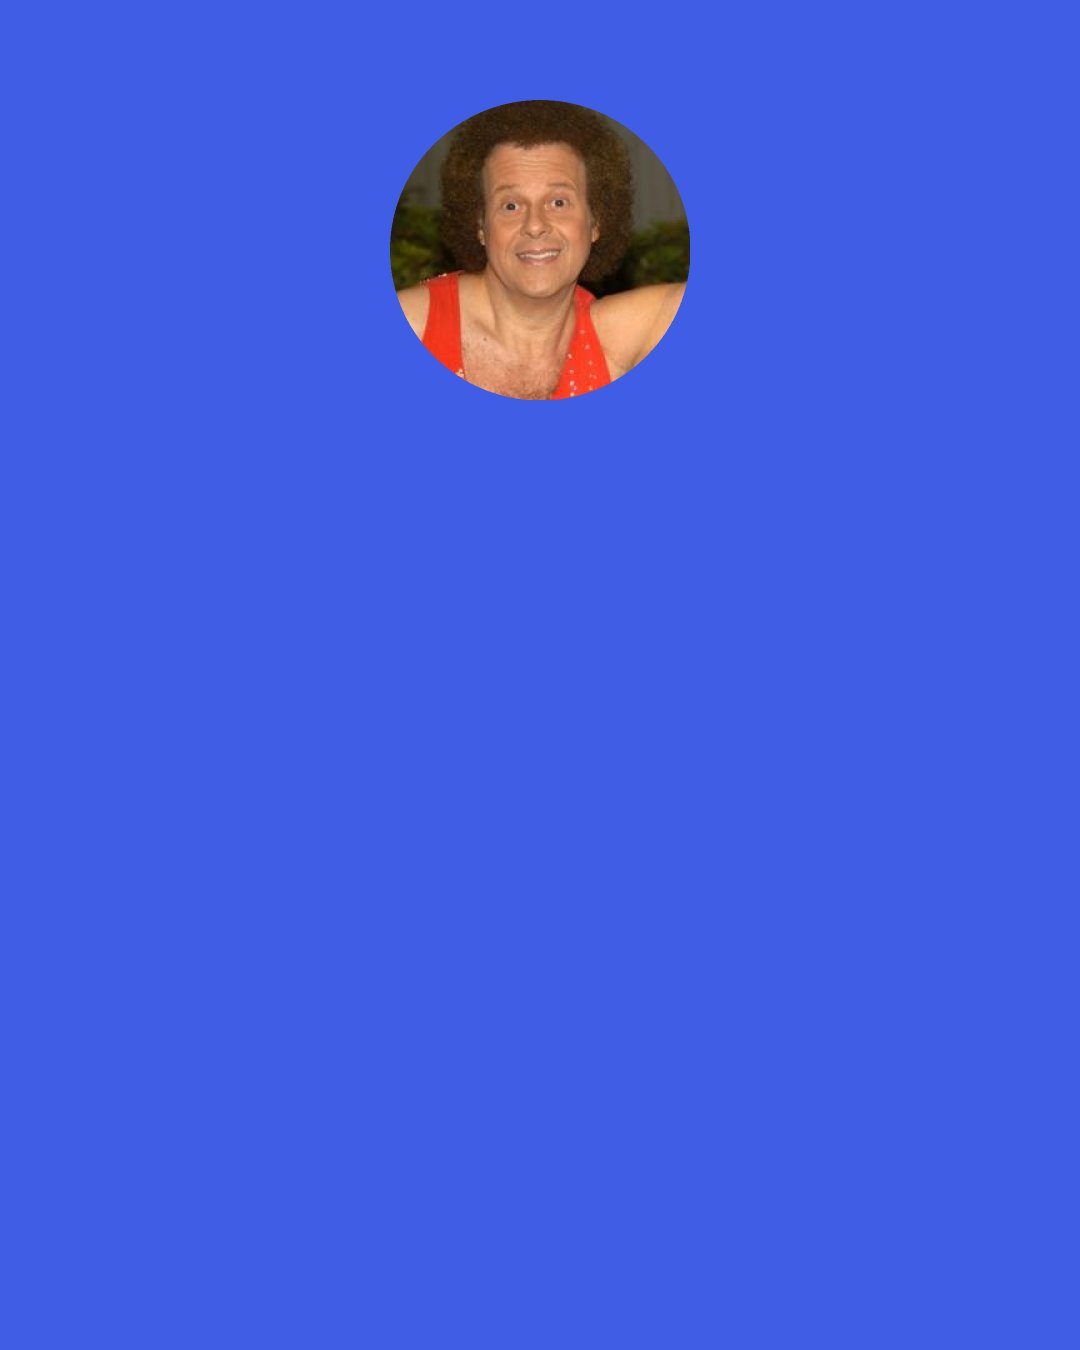 Richard Simmons: One day I may be meeting you and hearing how you've changed your life by saying, "Farewell to Fat".